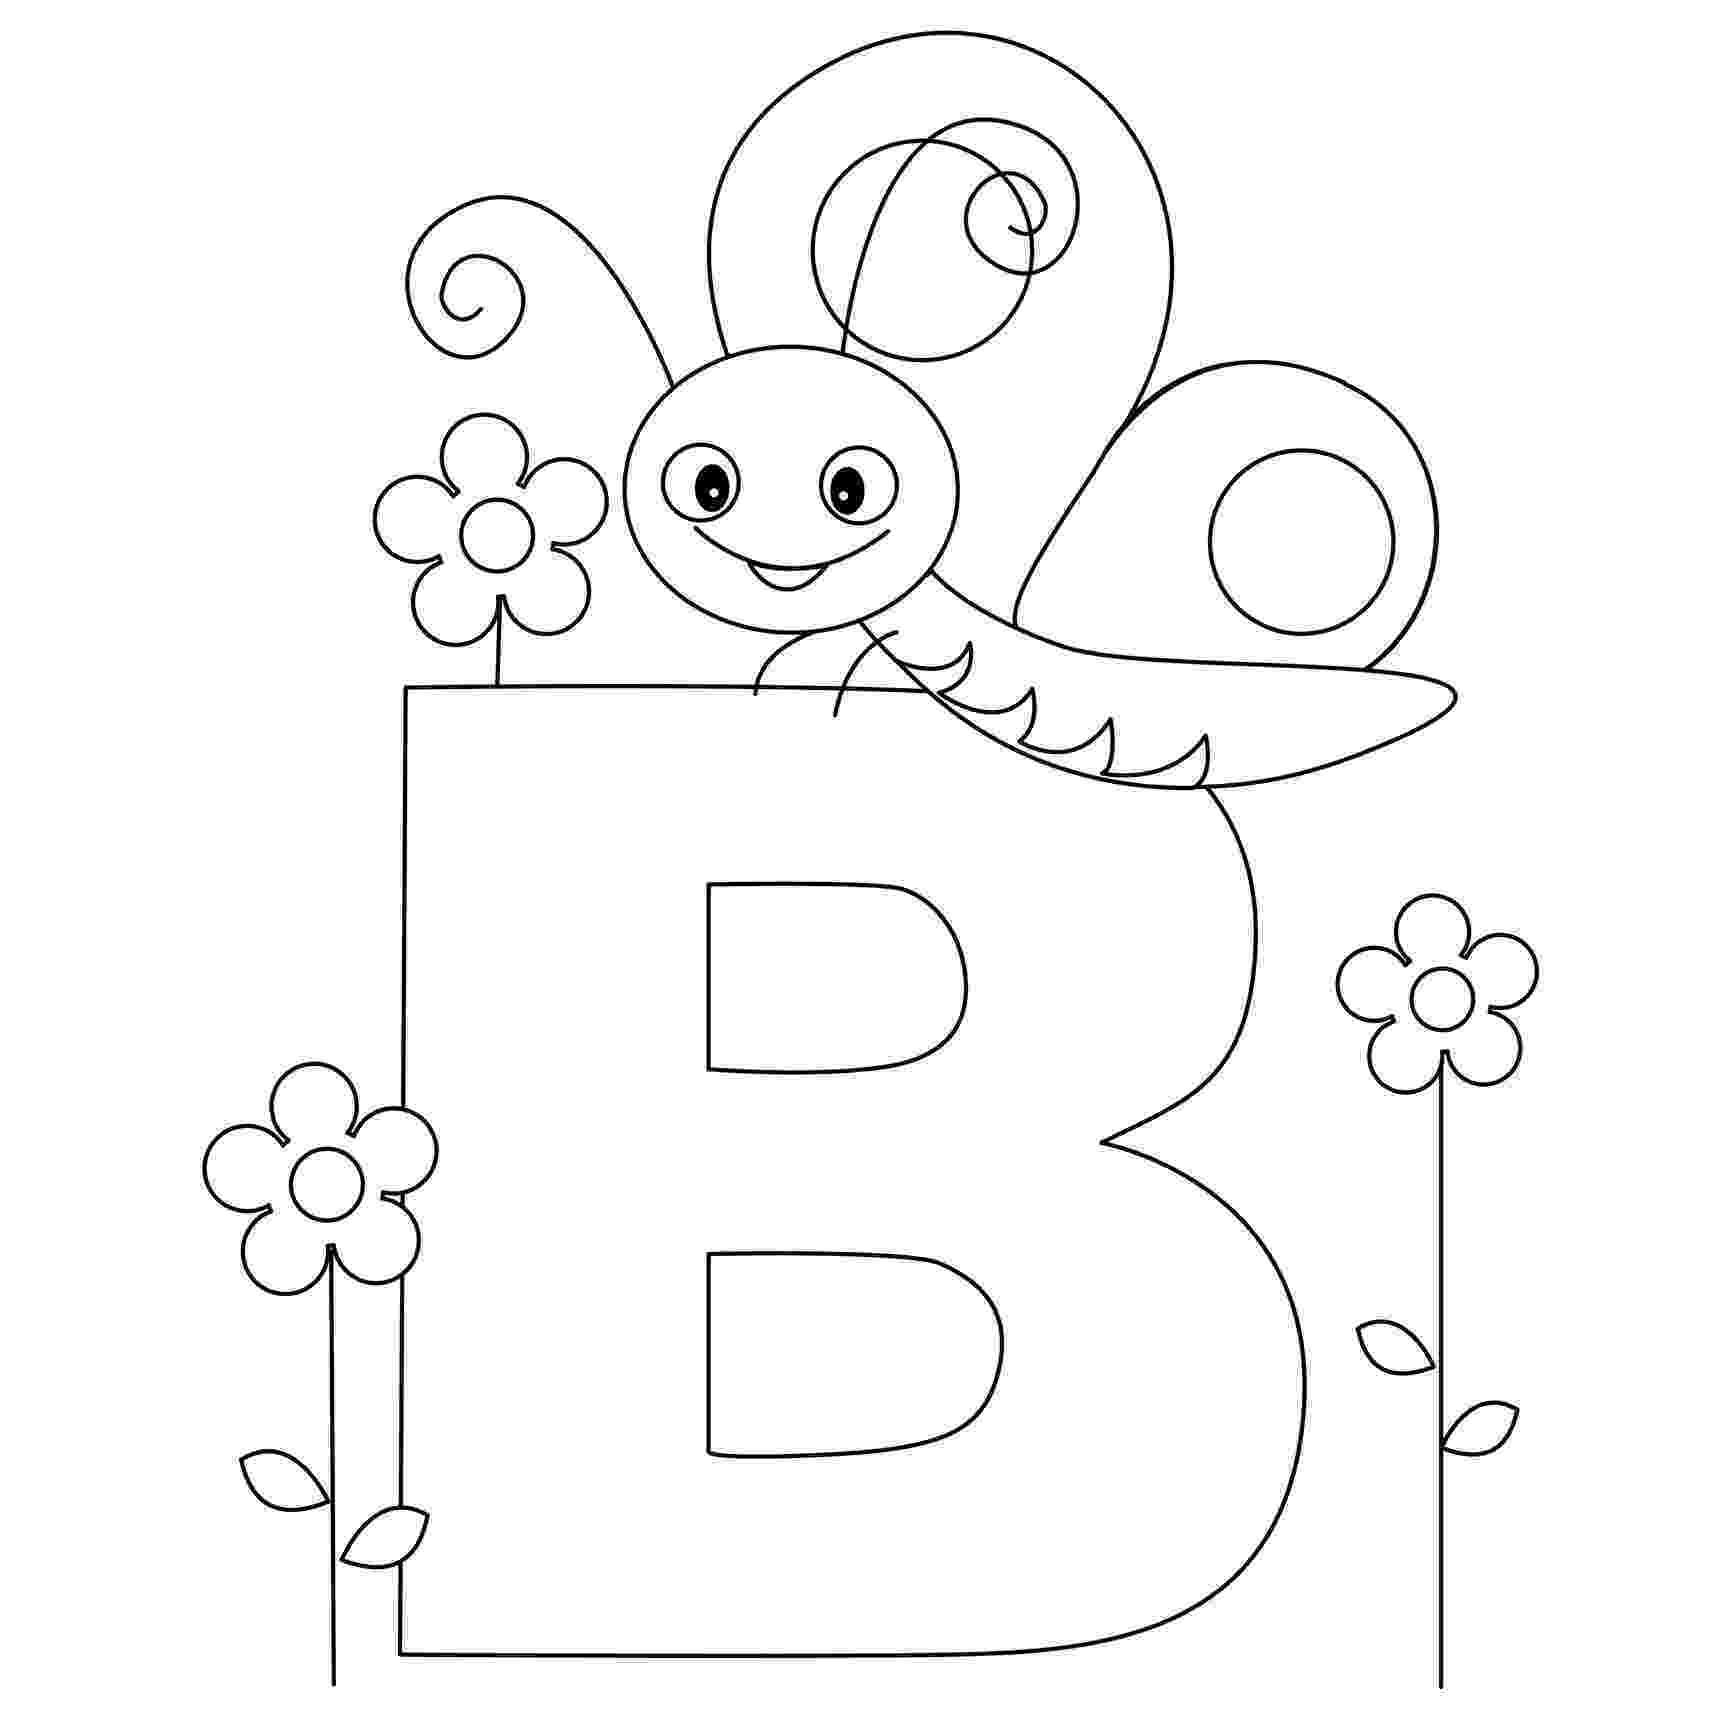 free printable alphabet coloring pages free printable alphabet coloring pages for kids best free pages coloring alphabet printable 